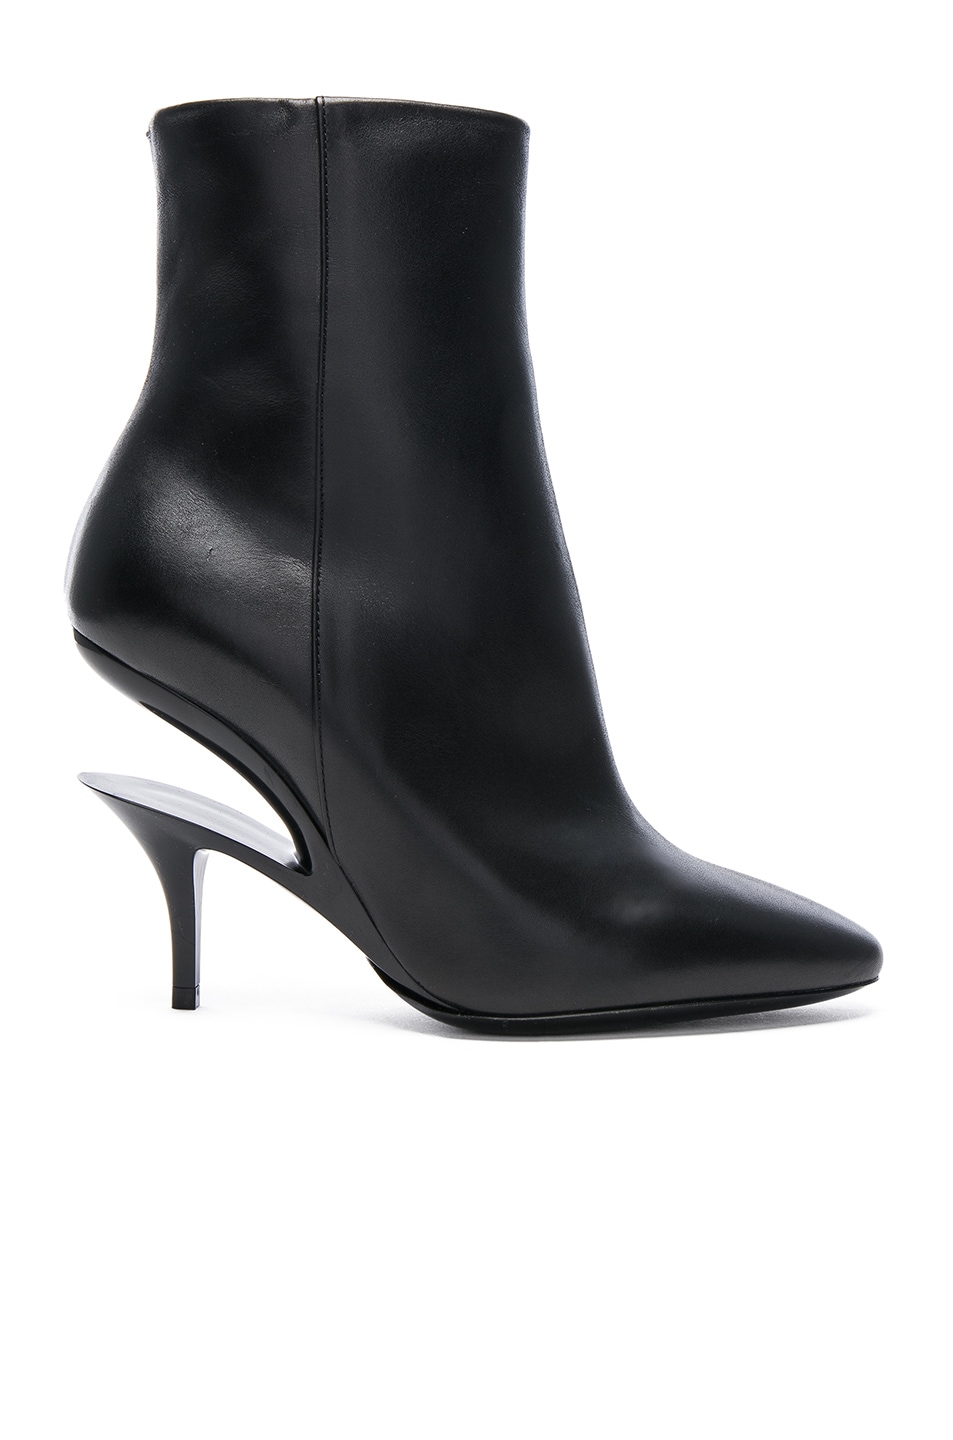 Image 1 of Maison Margiela Cut Out Leather Boots in Black